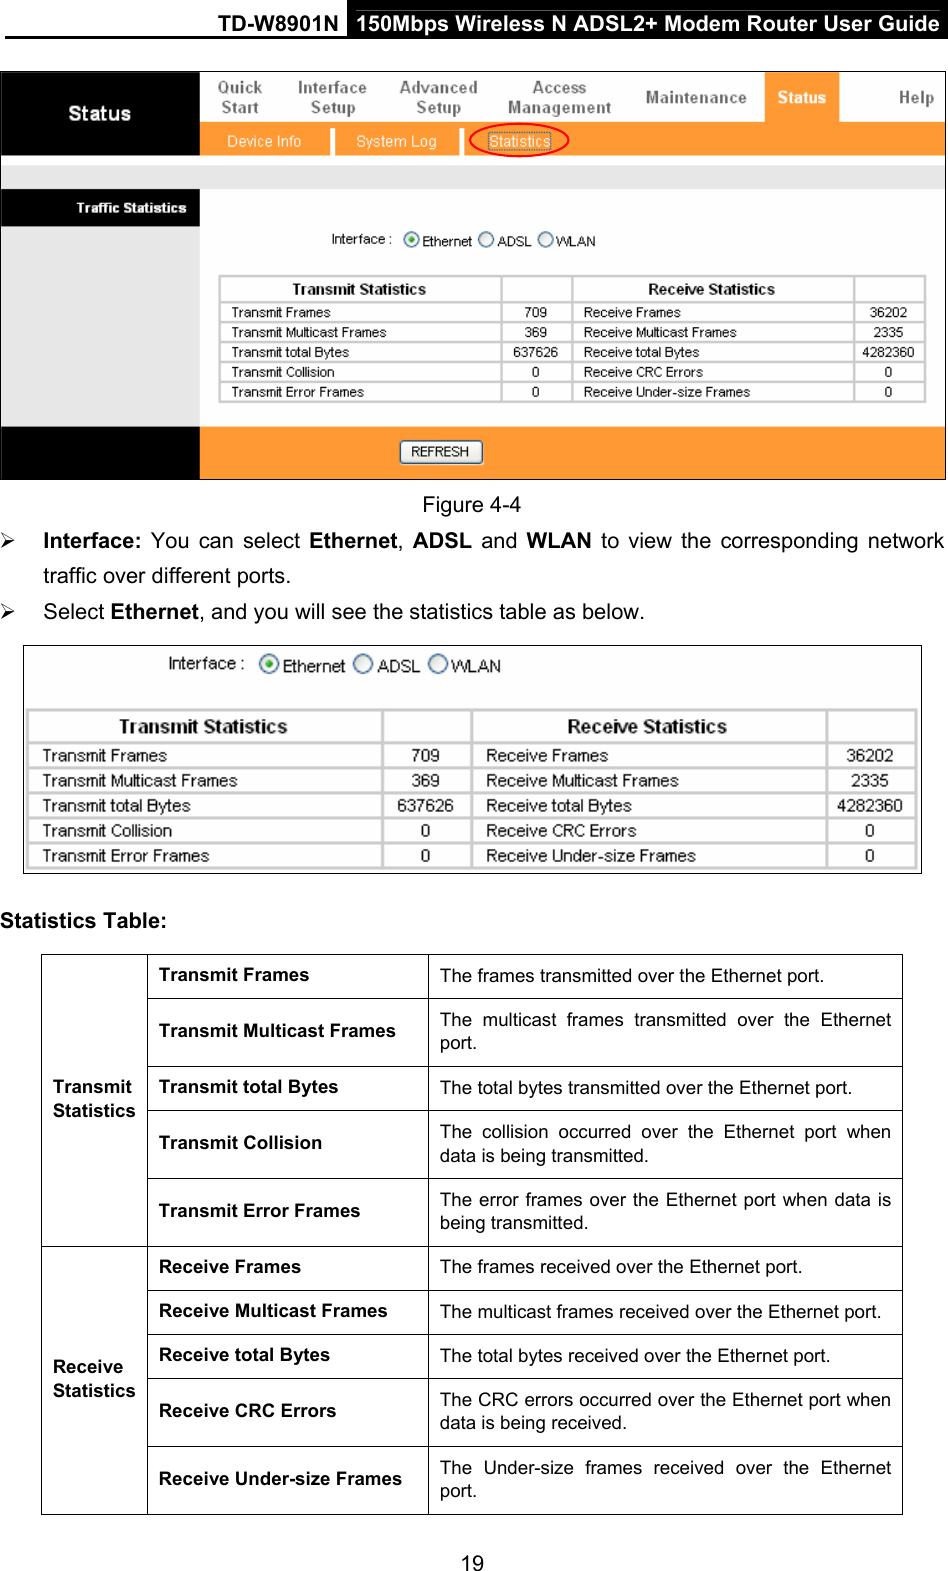 TD-W8901N  150Mbps Wireless N ADSL2+ Modem Router User Guide 19  Figure 4-4  Interface:  You can select Ethernet, ADSL and WLAN to view the corresponding network traffic over different ports.    Select Ethernet, and you will see the statistics table as below.  Statistics Table: Transmit Frames  The frames transmitted over the Ethernet port. Transmit Multicast Frames  The multicast frames transmitted over the Ethernet port. Transmit total Bytes  The total bytes transmitted over the Ethernet port. Transmit Collision  The collision occurred over the Ethernet port when data is being transmitted. Transmit Statistics Transmit Error Frames  The error frames over the Ethernet port when data is being transmitted.   Receive Frames  The frames received over the Ethernet port. Receive Multicast Frames  The multicast frames received over the Ethernet port. Receive total Bytes  The total bytes received over the Ethernet port. Receive CRC Errors  The CRC errors occurred over the Ethernet port when data is being received. Receive Statistics Receive Under-size Frames  The Under-size frames received over the Ethernet port. 